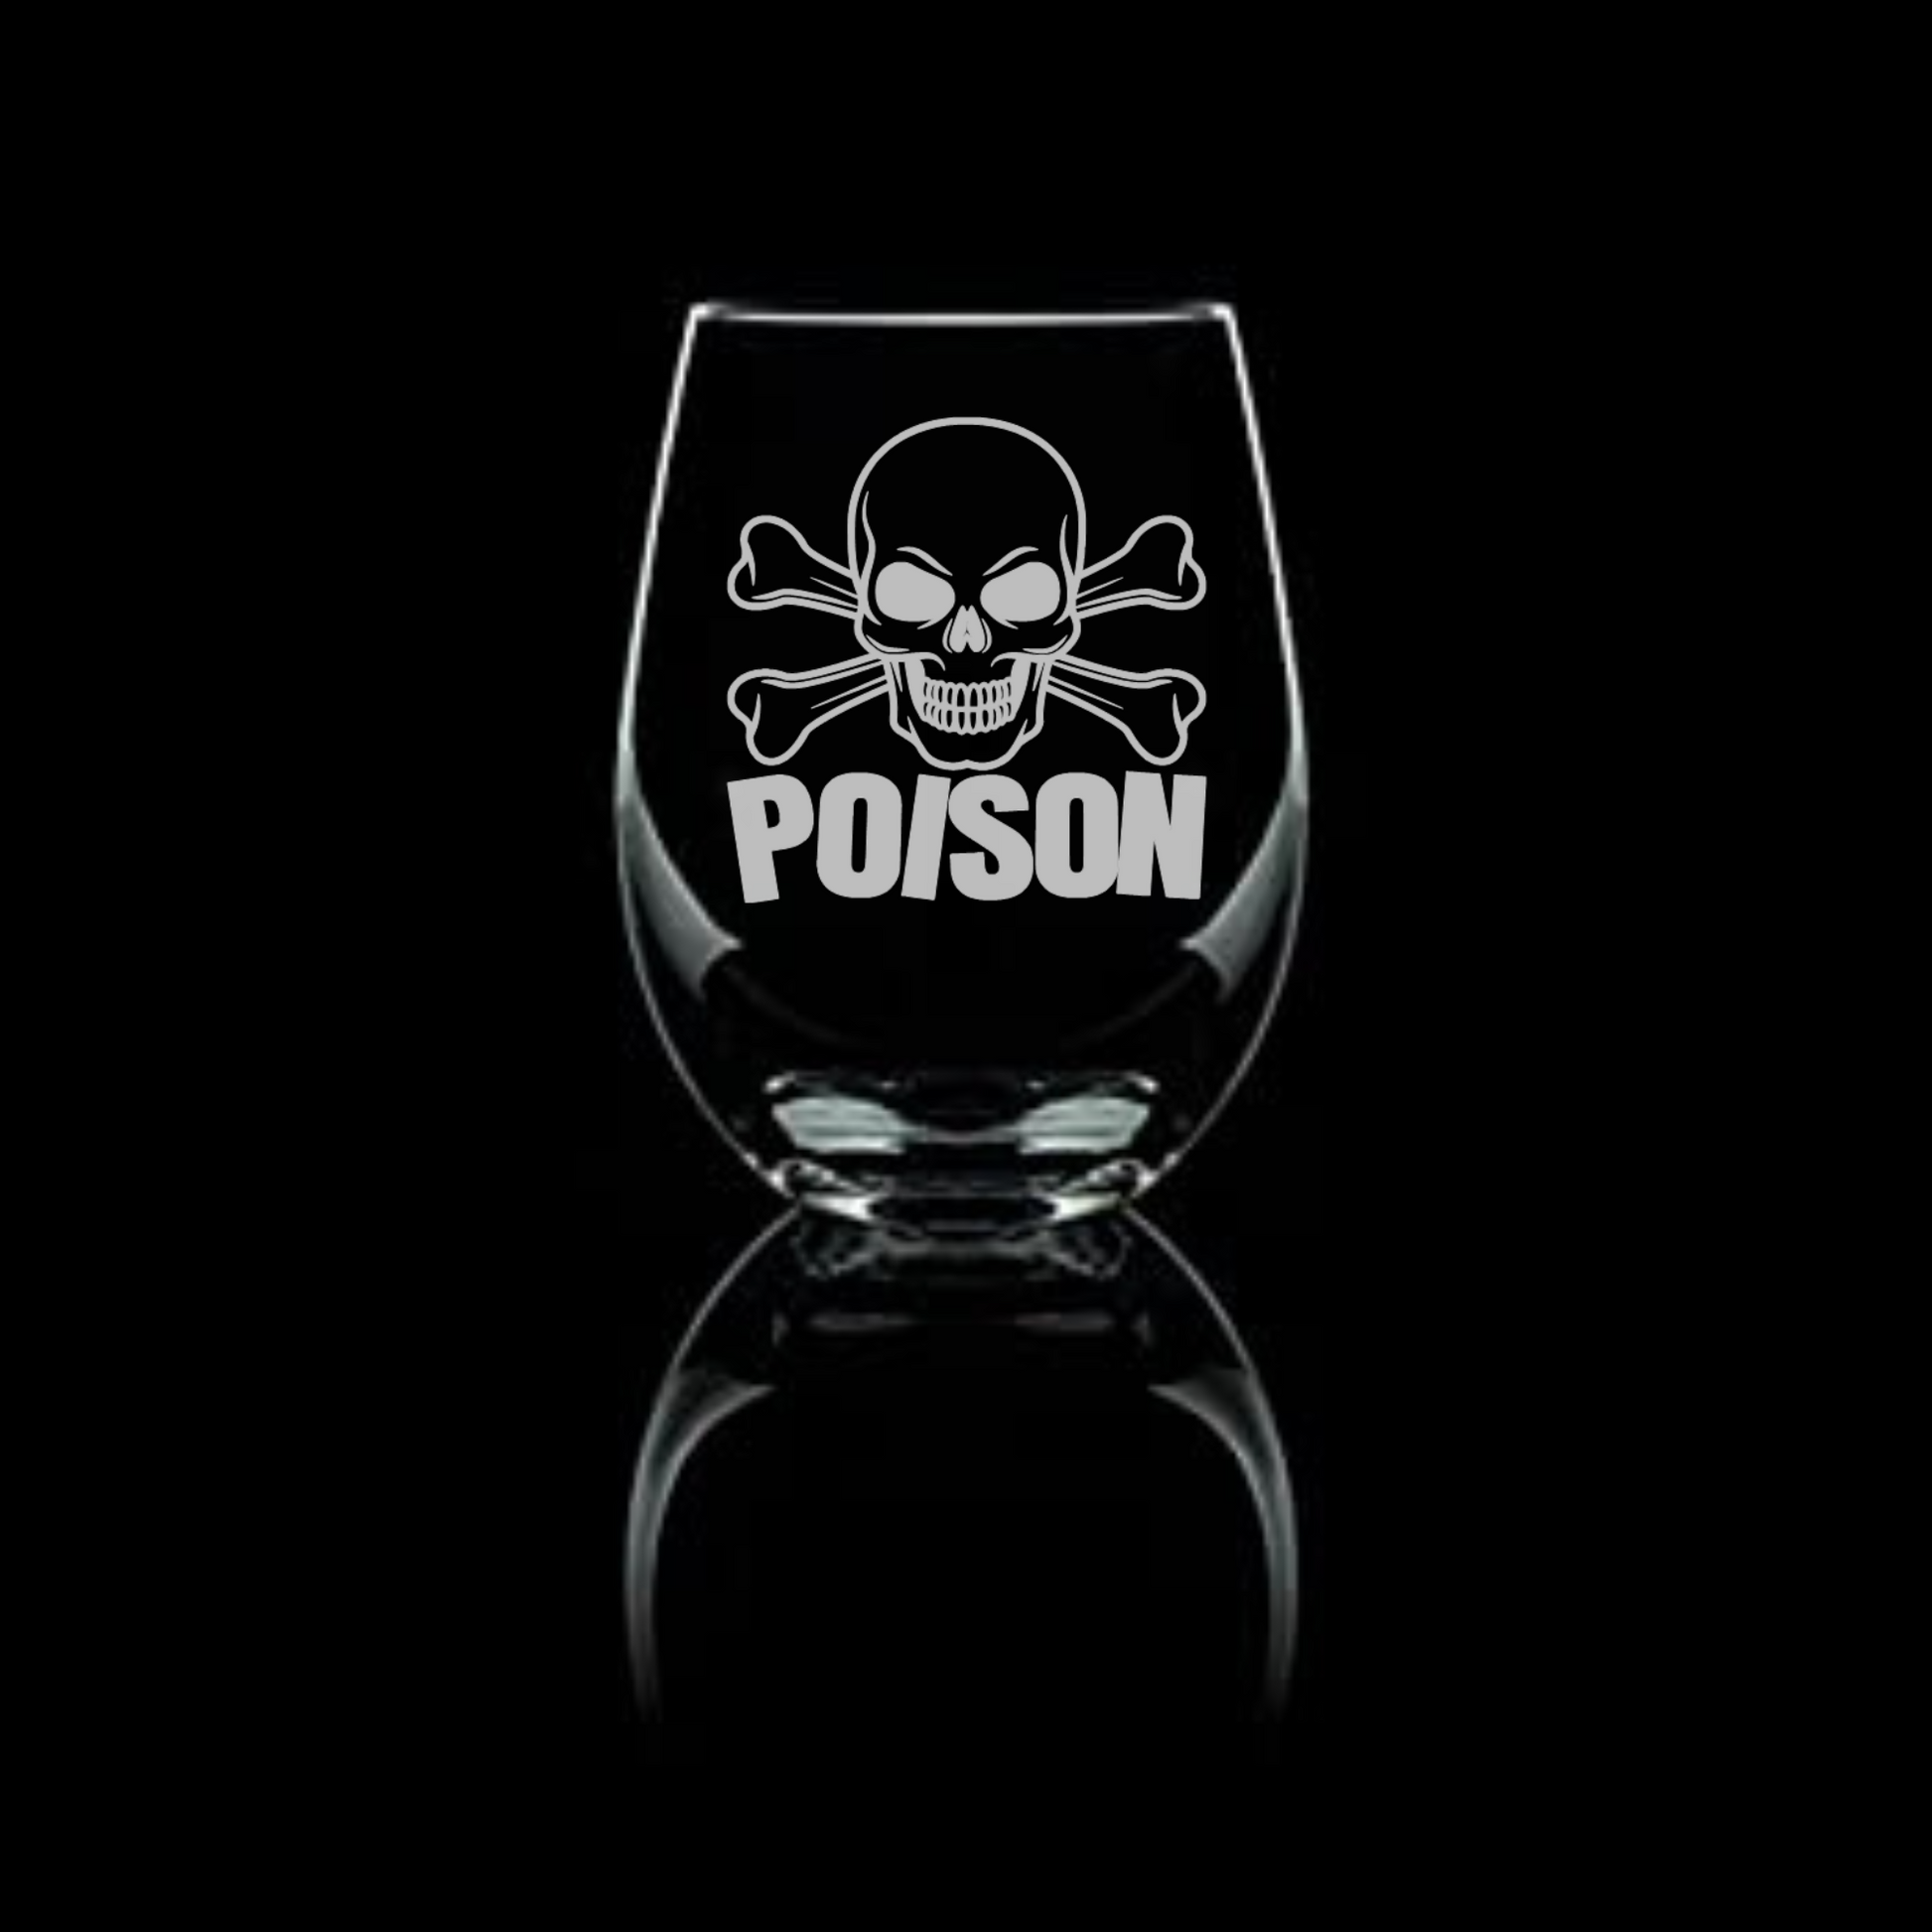 Halloween Cross Bones and Poison Etched Stemless Wine Glass 20.5oz - Expressive DeZien 